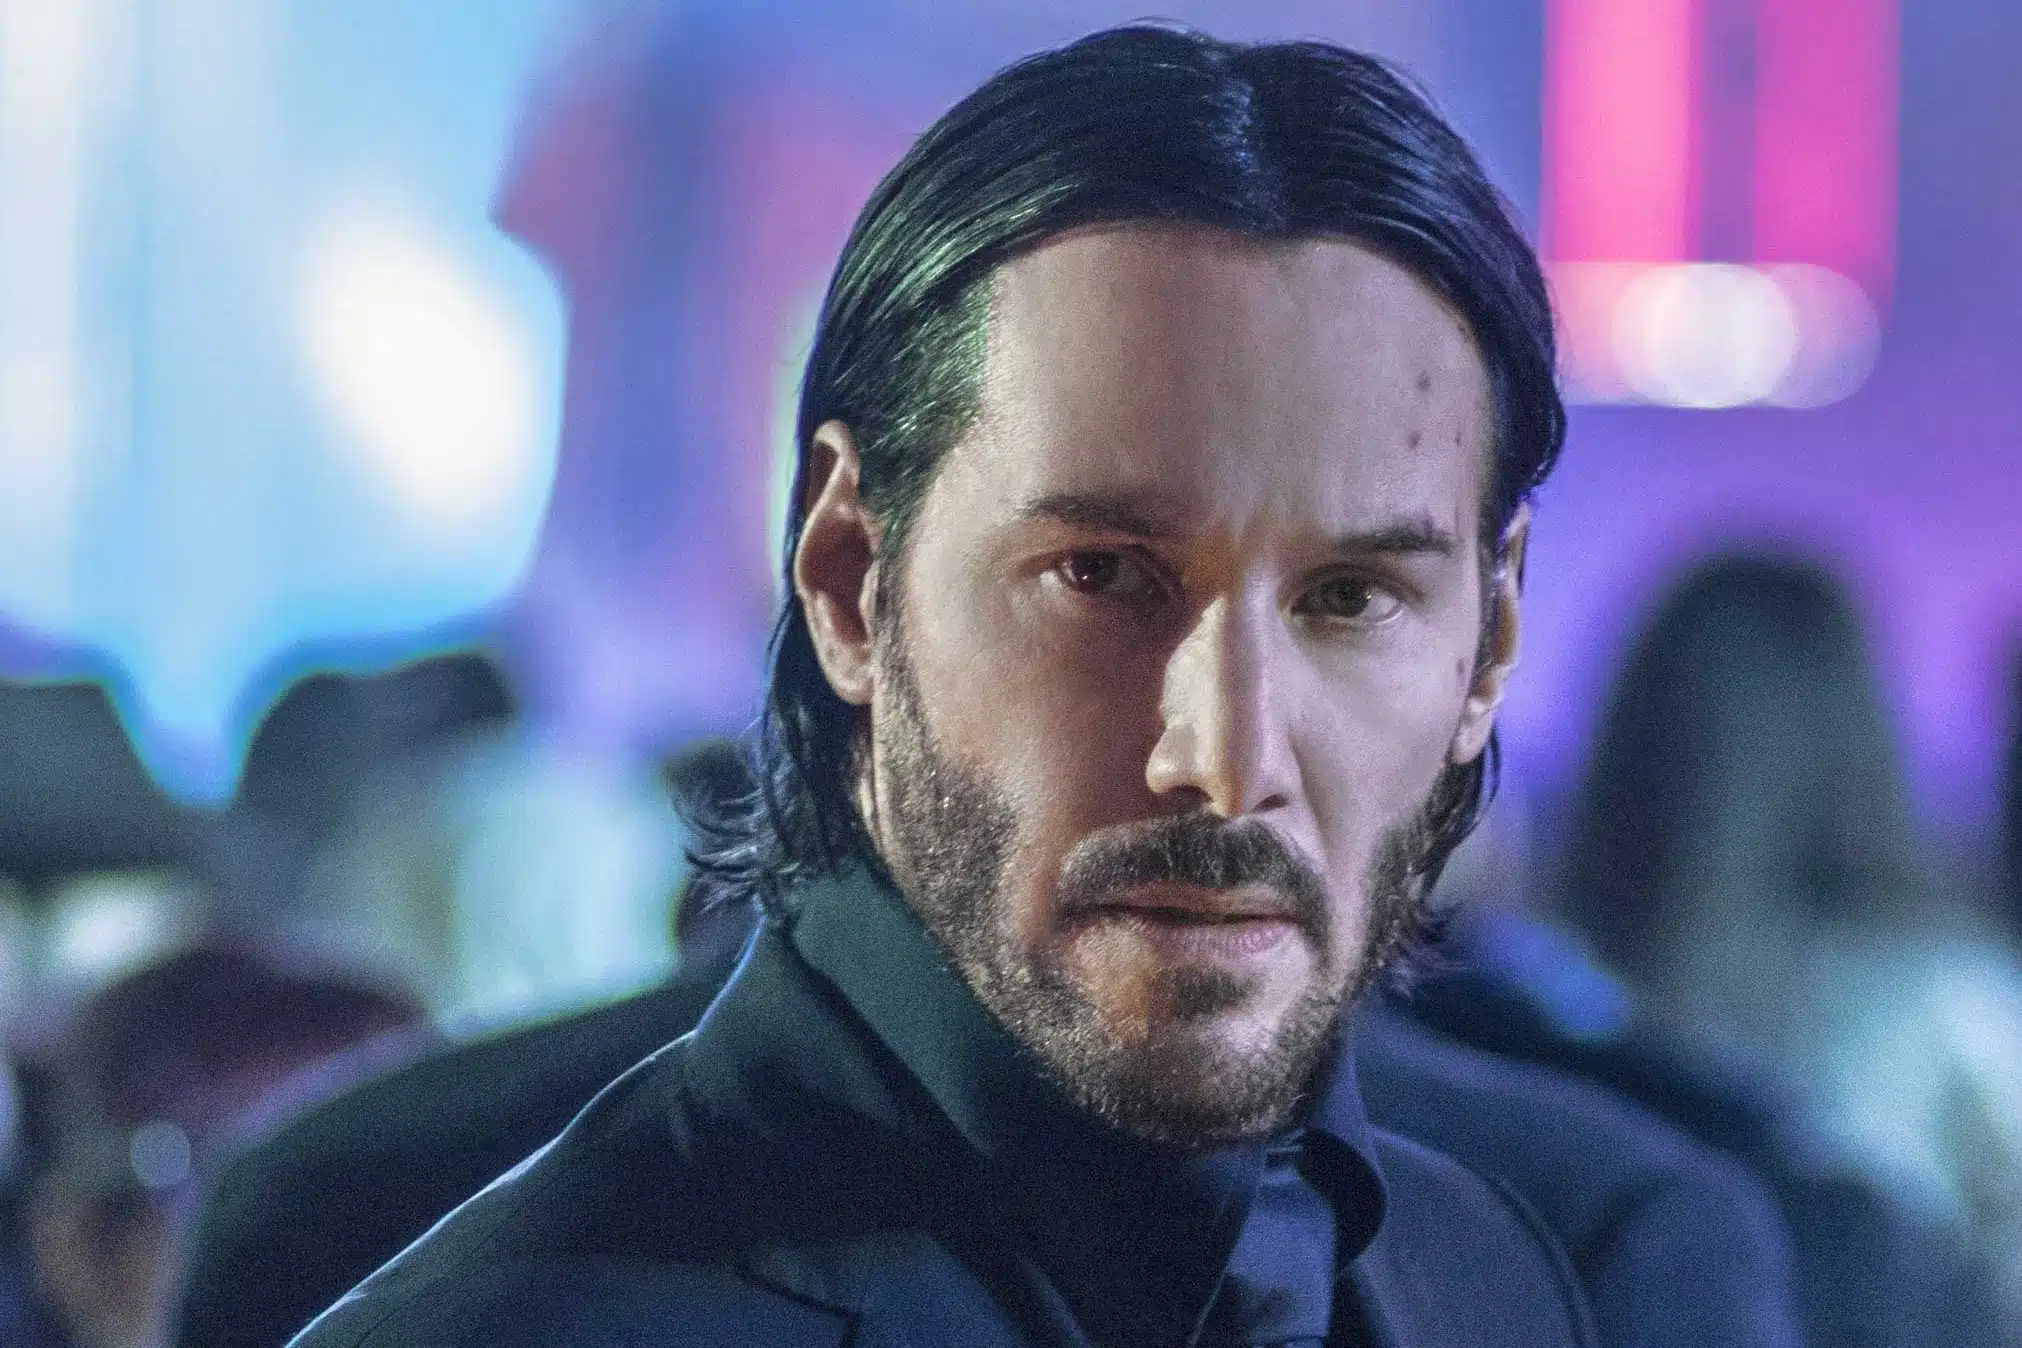 Where to Watch John Wick All Movies Online - Keanu Reeves